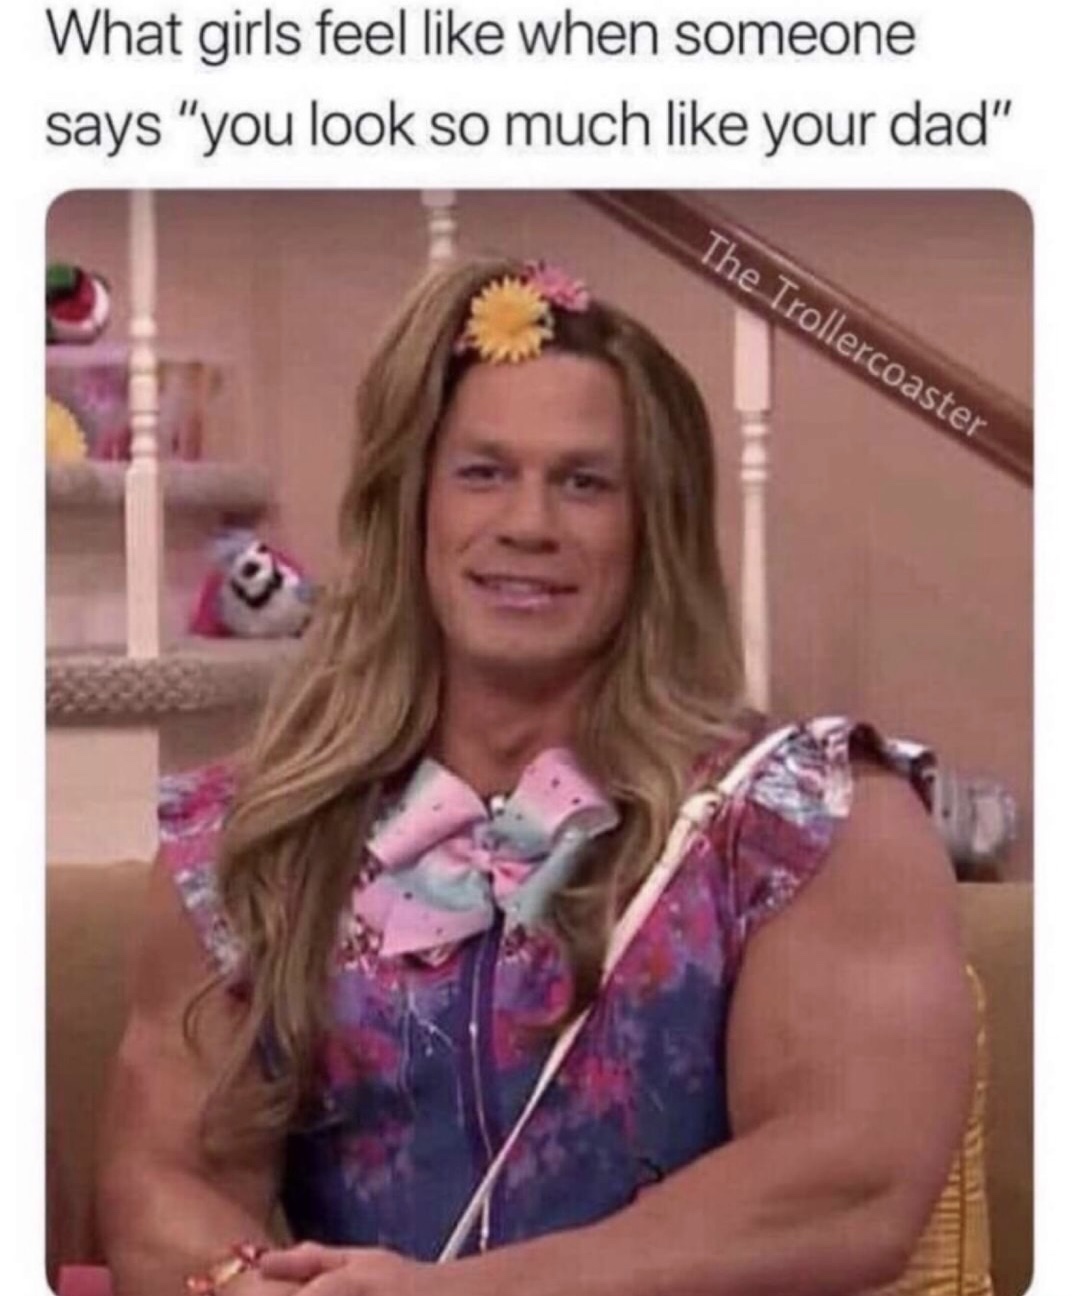 girls feel like when someone says you look so much like your dad - What girls feel when someone says "you look so much your dad" The Trollercoaster